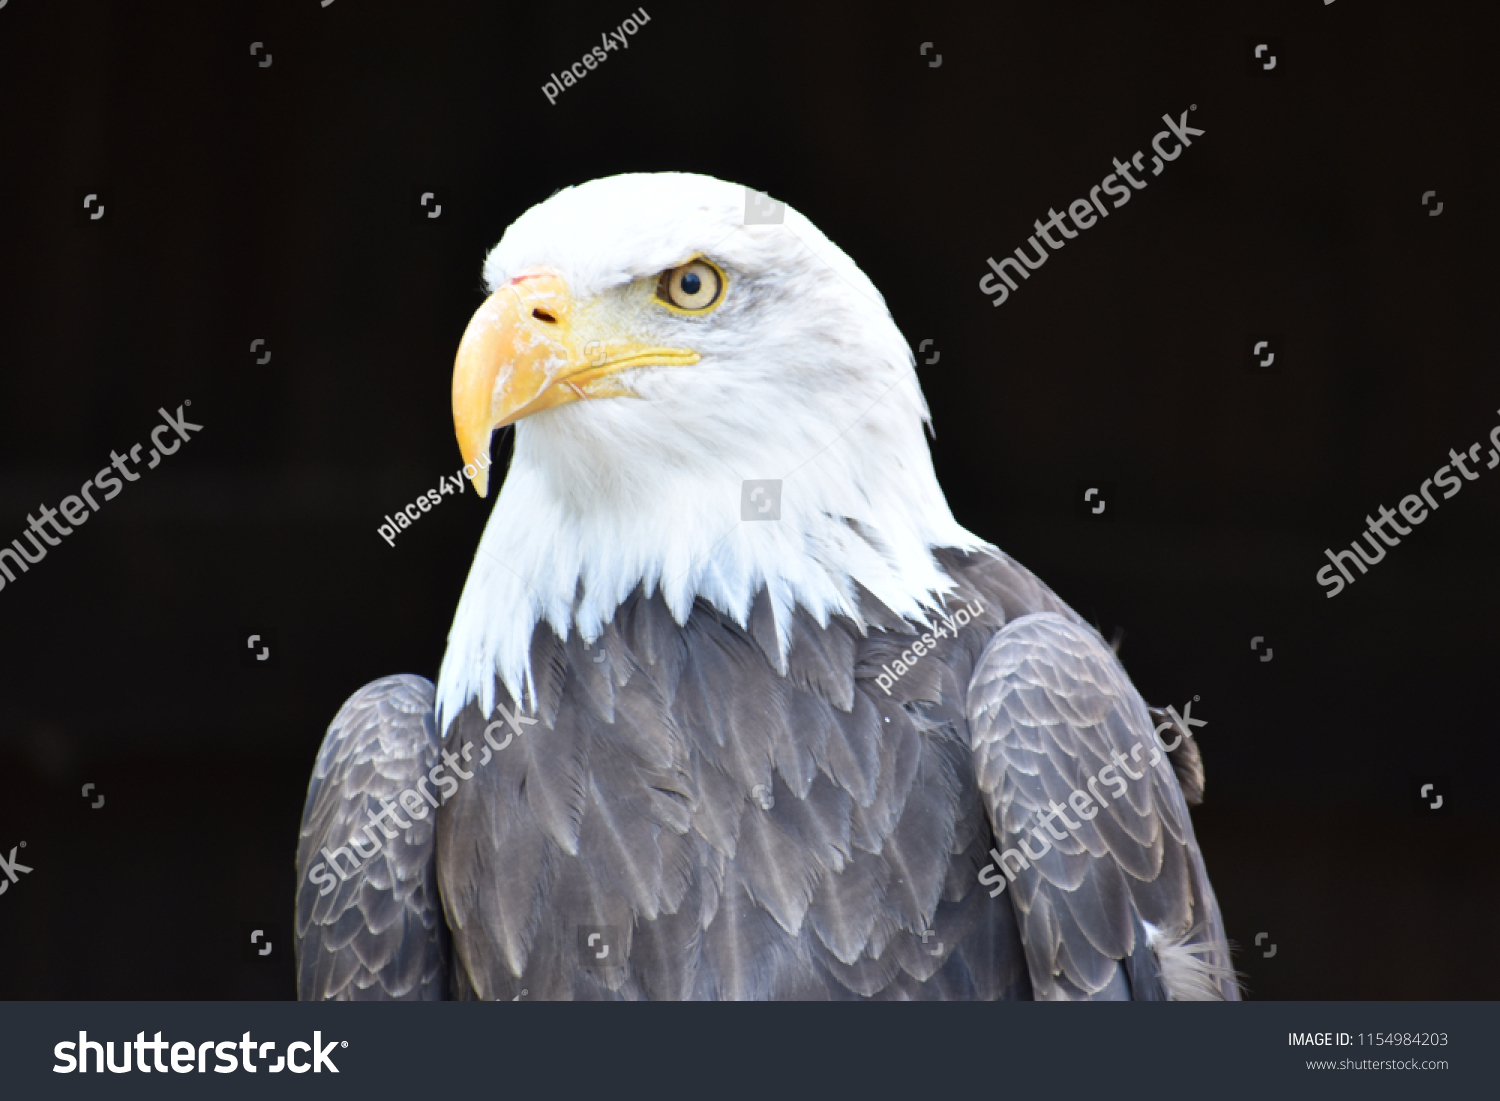 Wonderful majestic portrait of an american bald eagle with a black background #1154984203